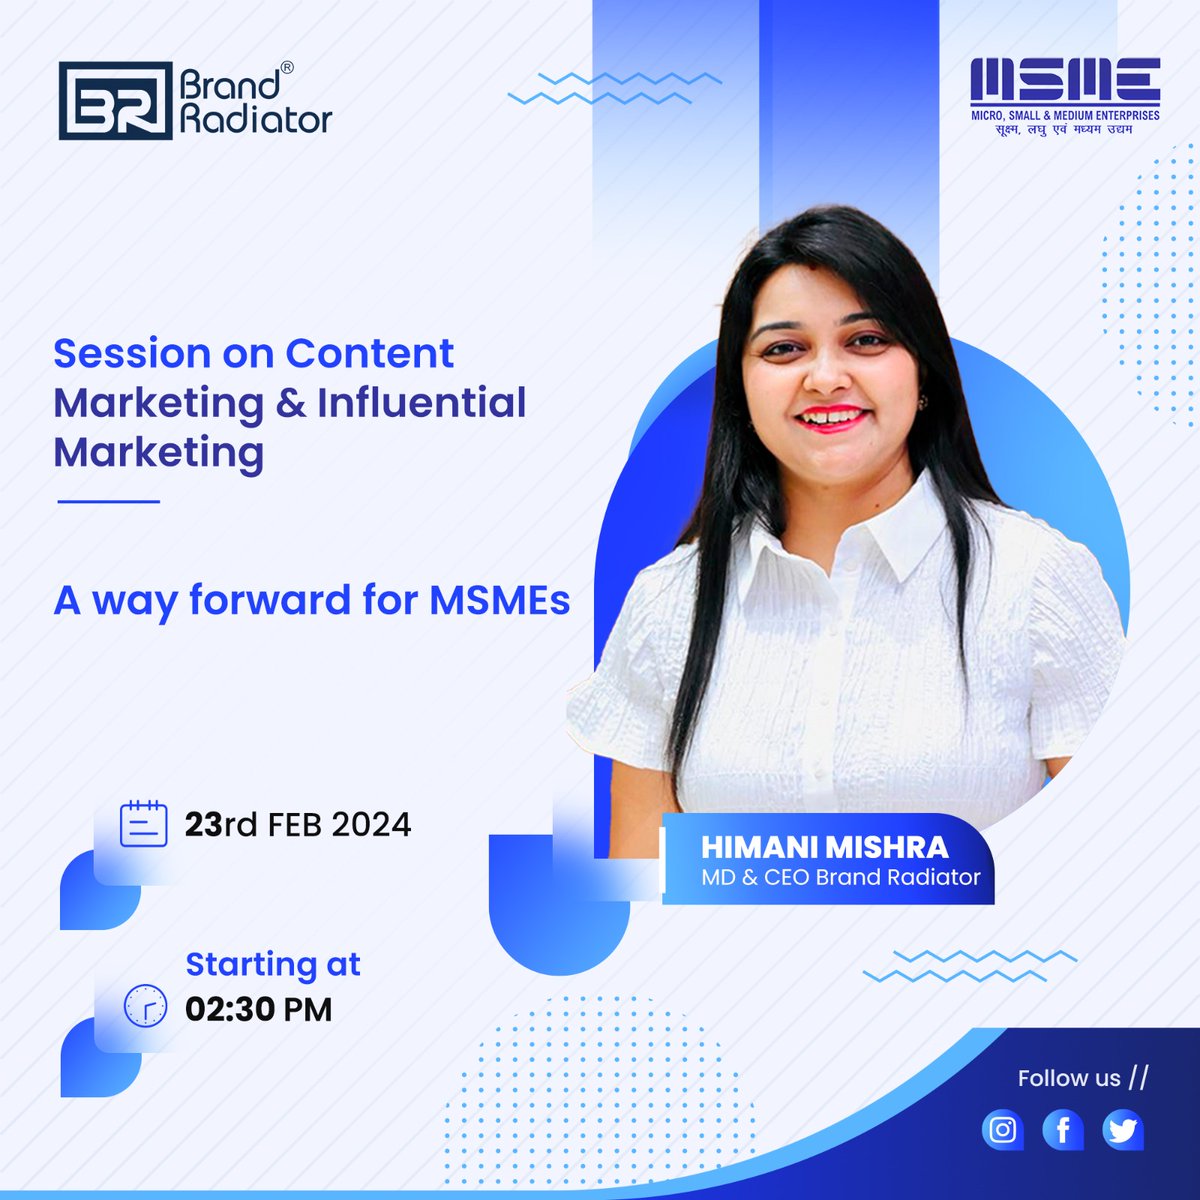 We are filled with utmost delight to witness our #PowerPuffMD Mrs. Himani Mishra presenting an Empirical session on Content Marketing and Influential Marketing.
#brandradiator #digitalmarketing #contentmarketing #influentialmarketing #womenentrepreneurs #entrepreneurship